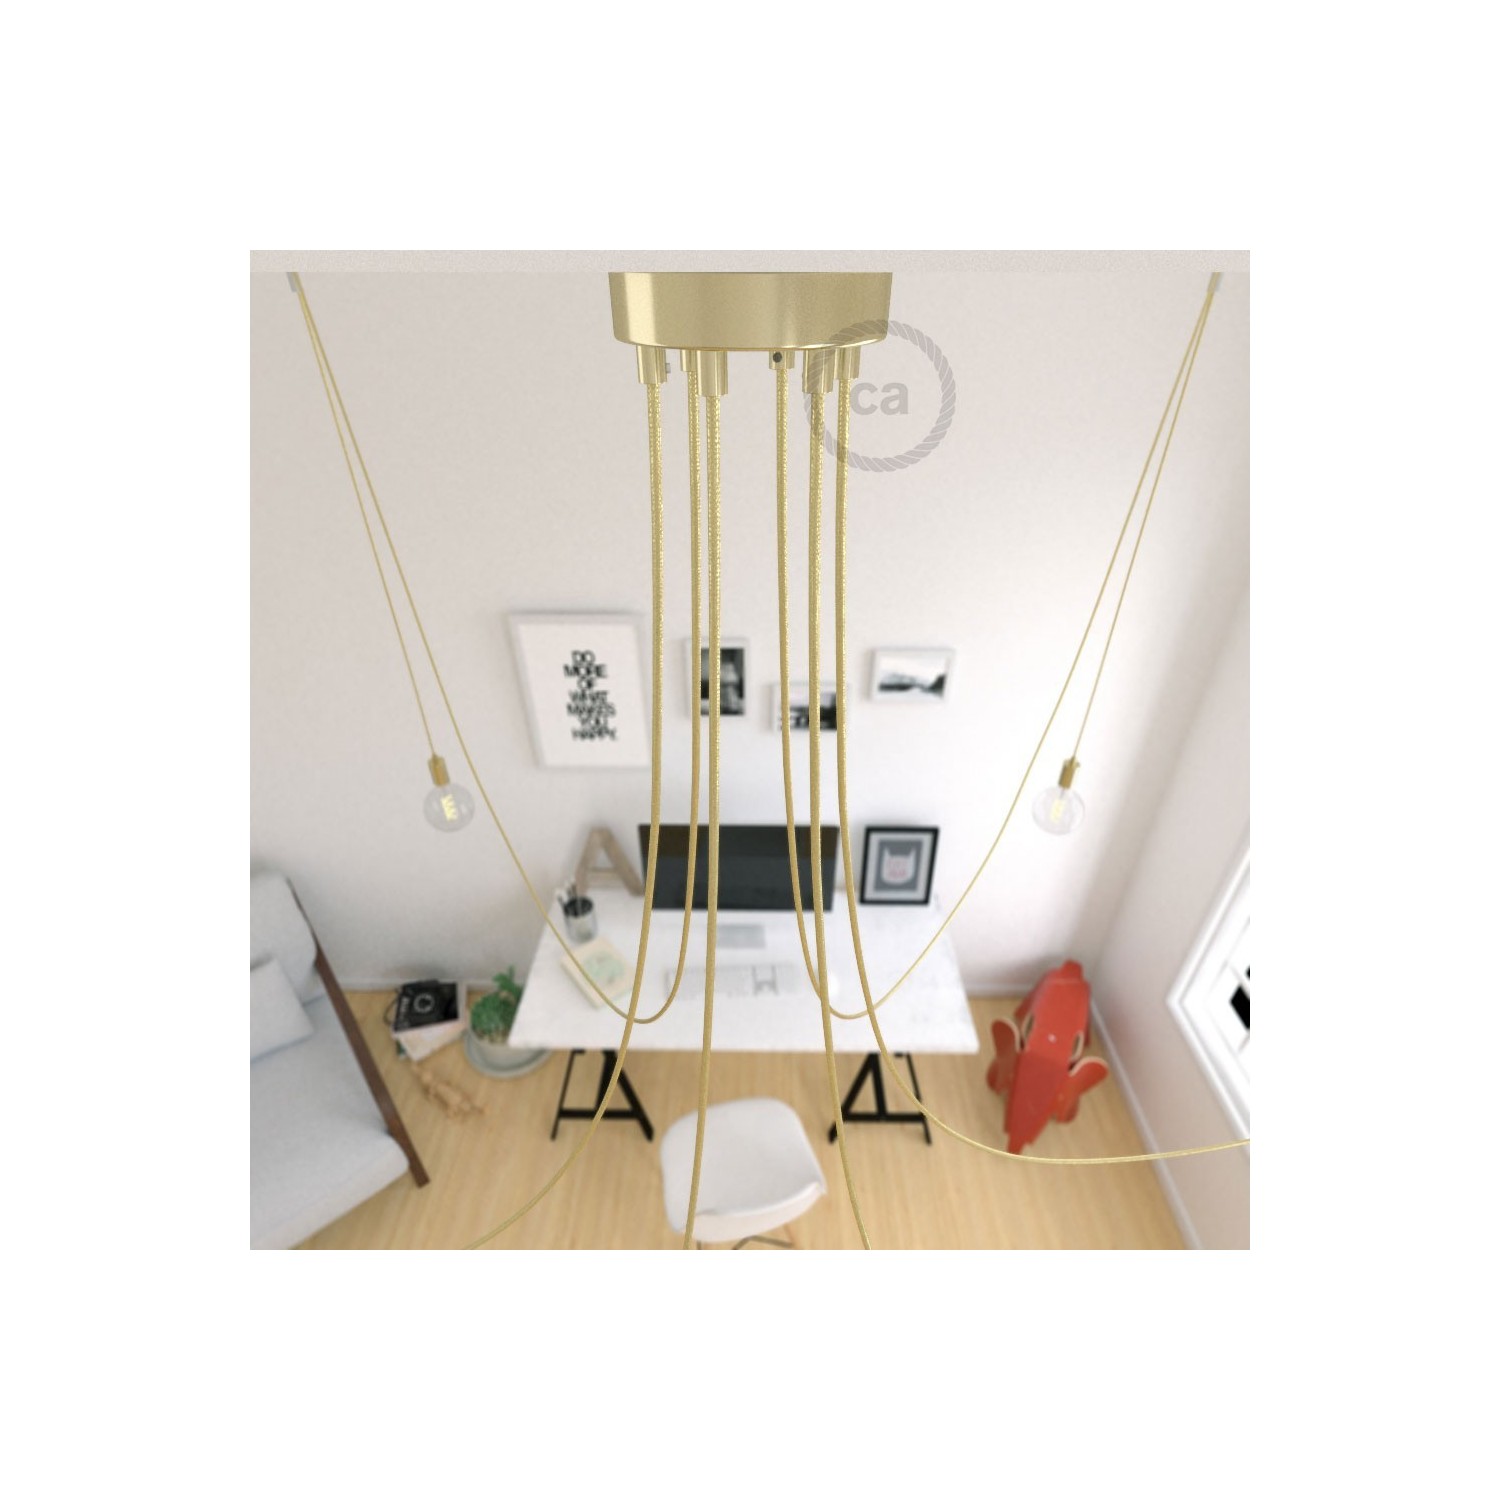 Spider, multiple suspension with 6 pendants, brass metal, RR13 Brass coloured Copper cable, Made in Italy.